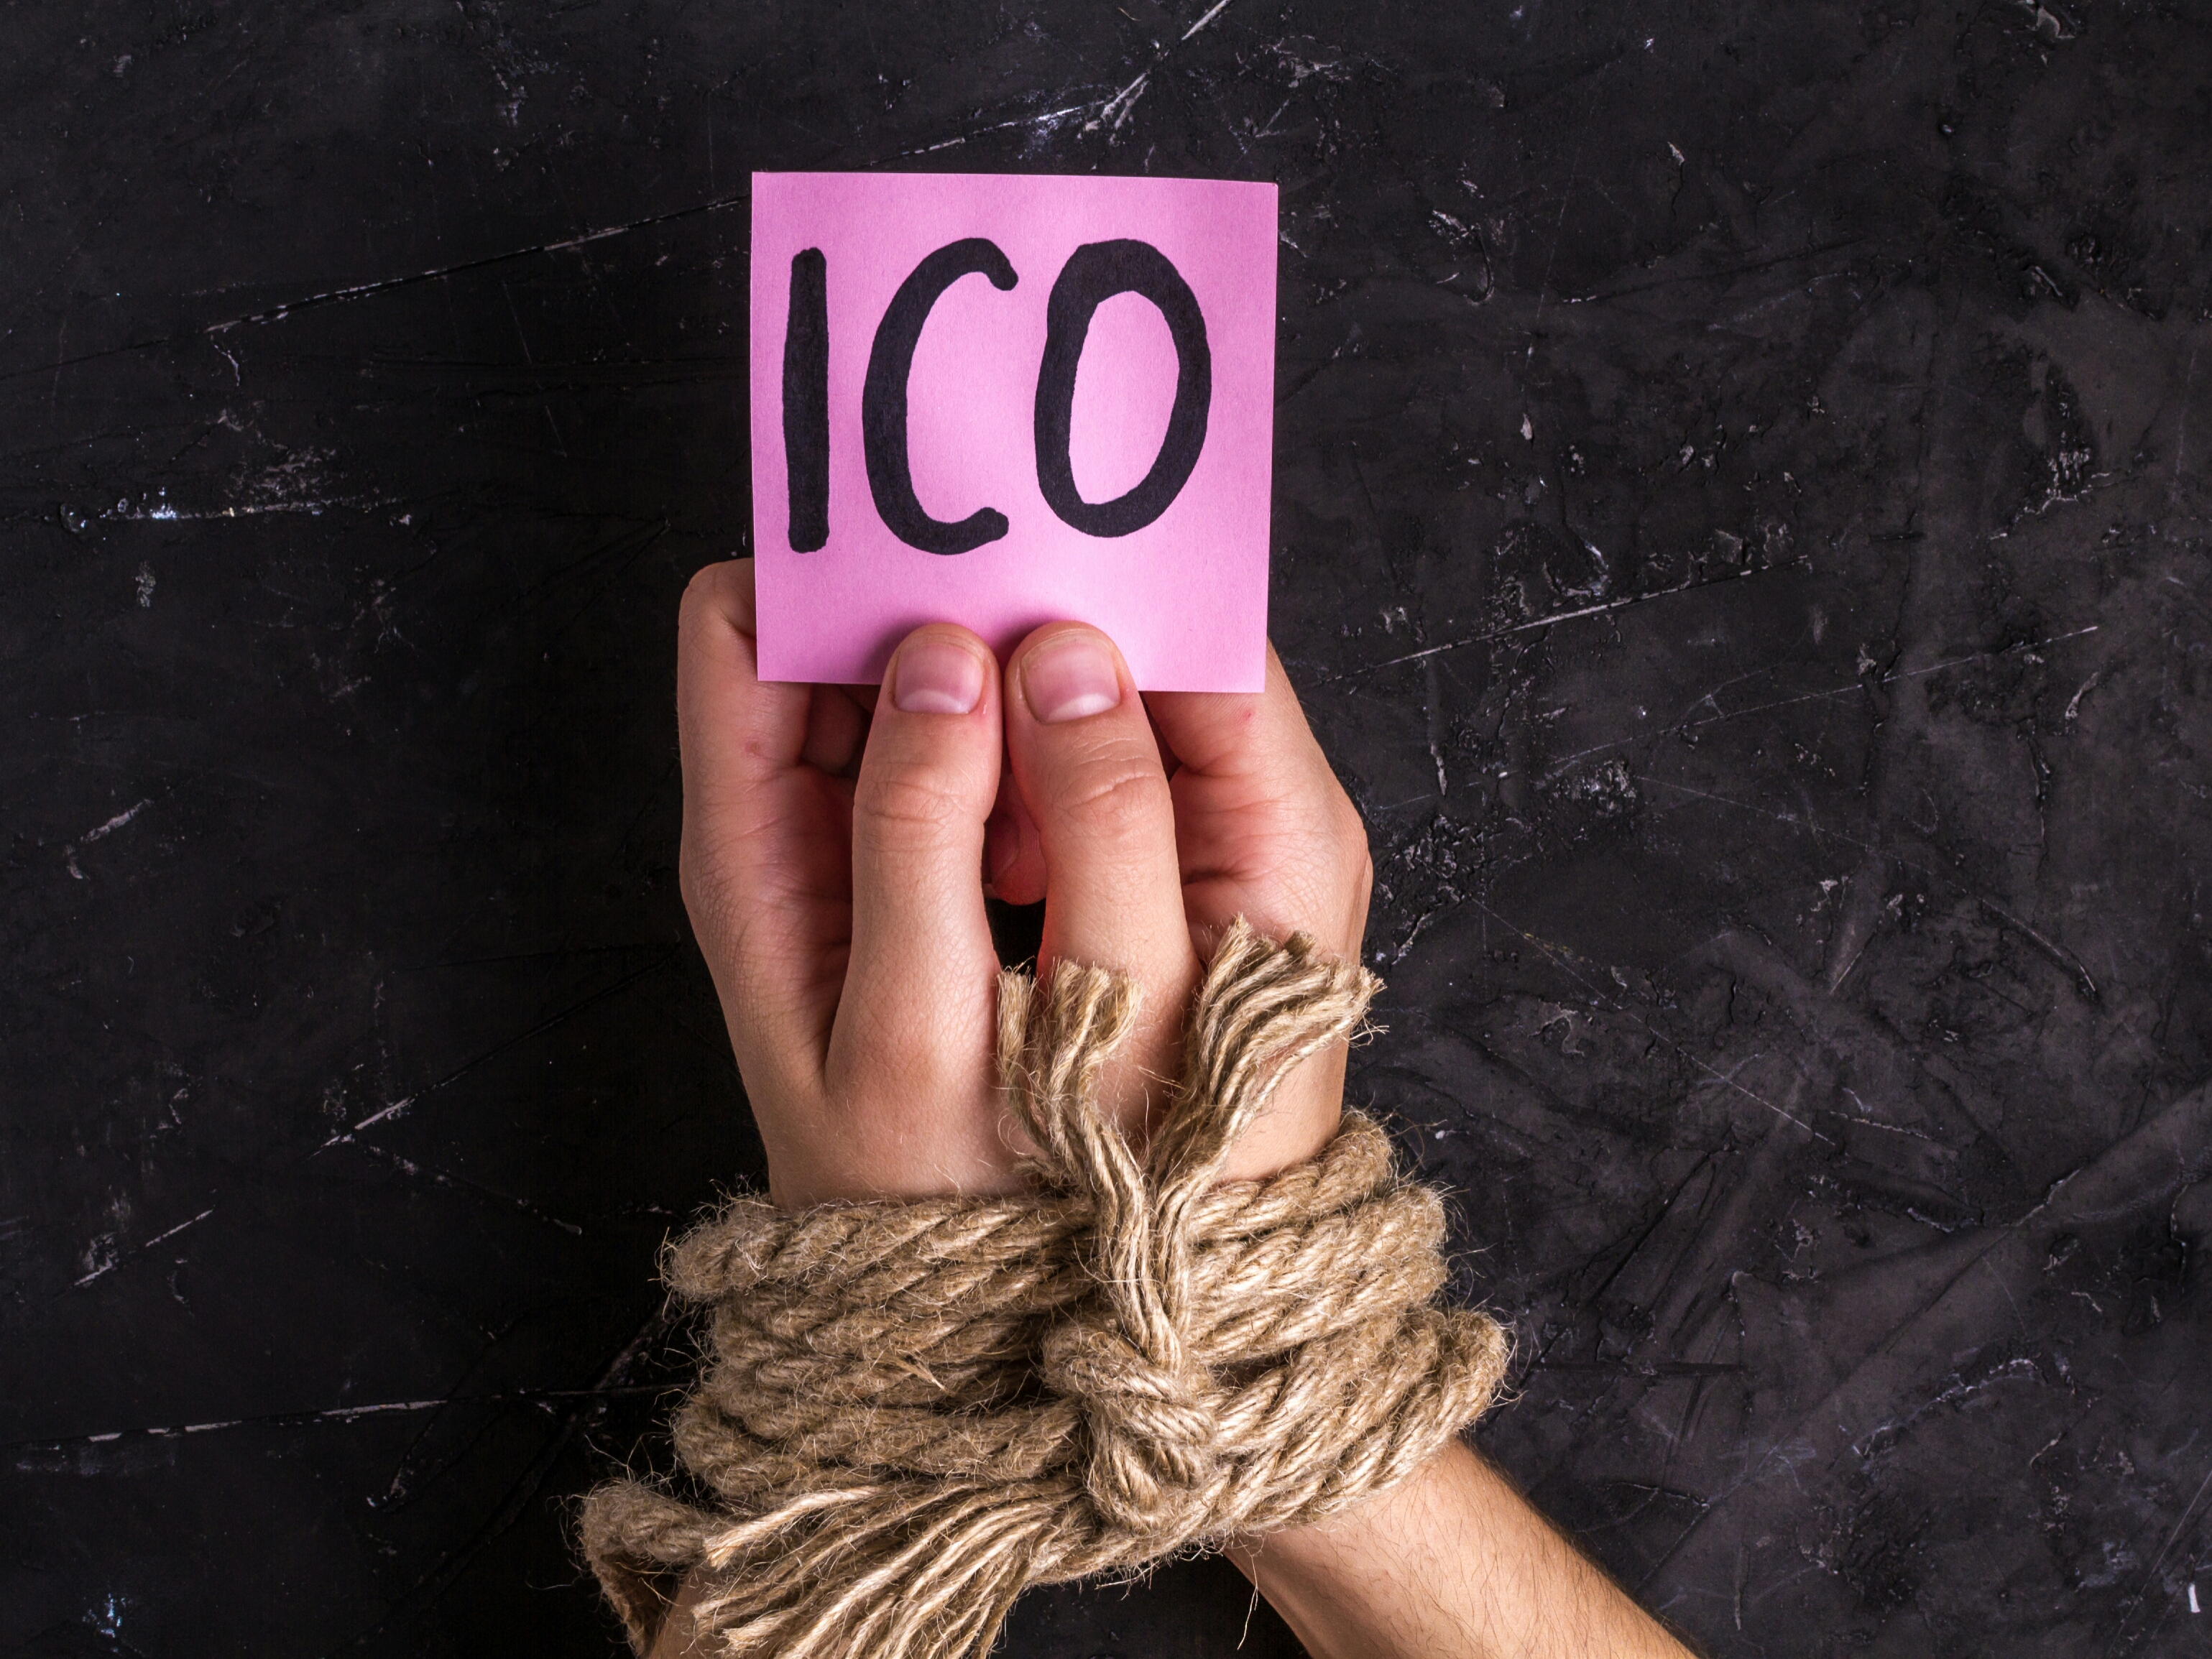 "This Is Not an ICO, Just Barter” - ICO Issuers Alter Terms to Evade Regulatory Scrutiny